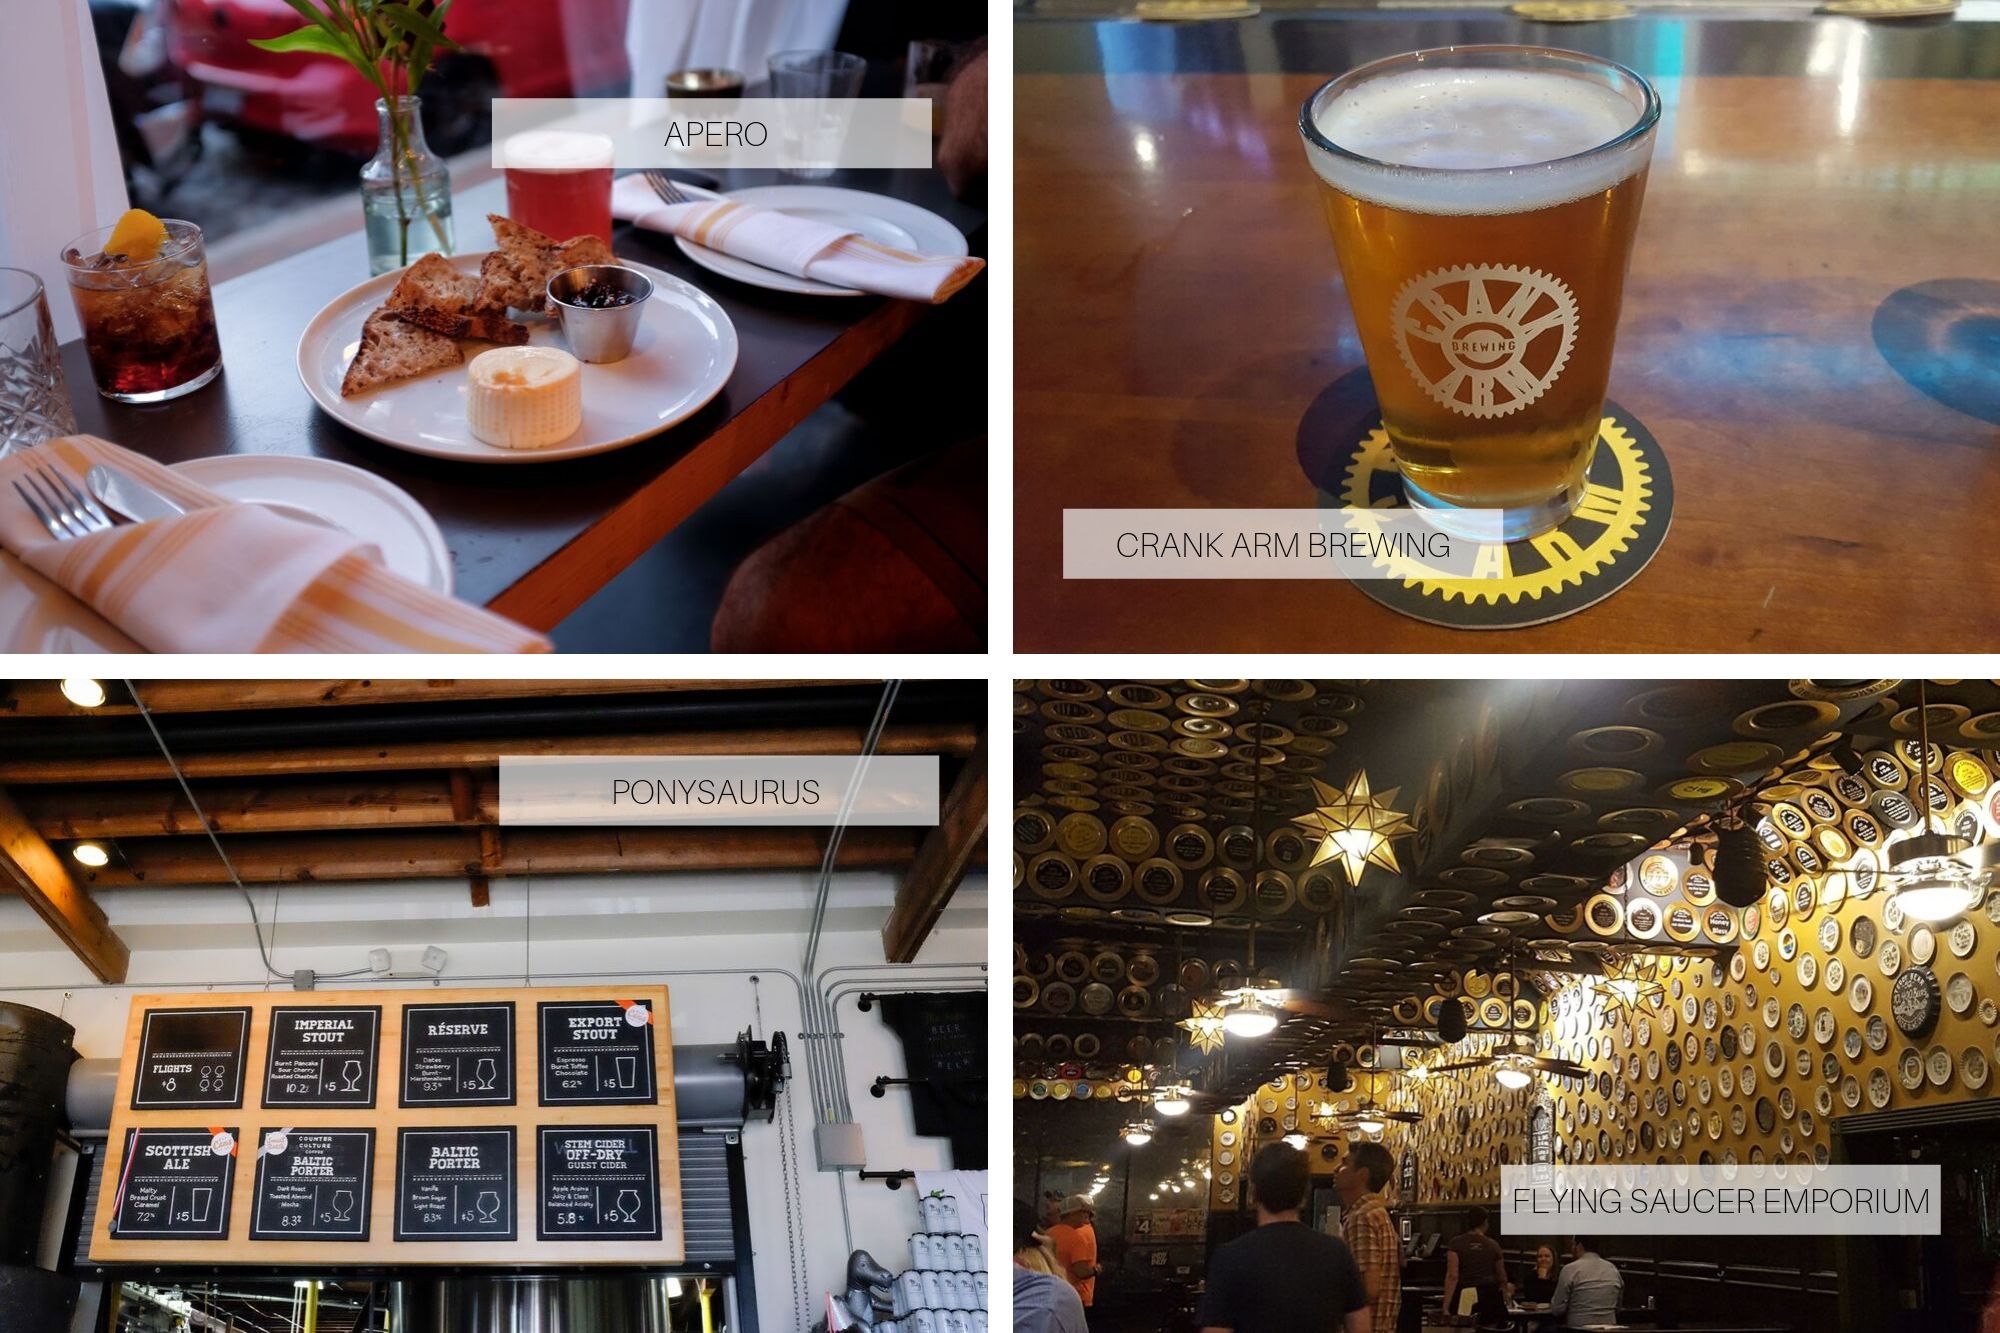 Collage: drinks and snack at Apero, beer in a glass at Crank Arm, the menu at Ponysaurus, and the saucers on the ceiling at Flying Saucer Emporium